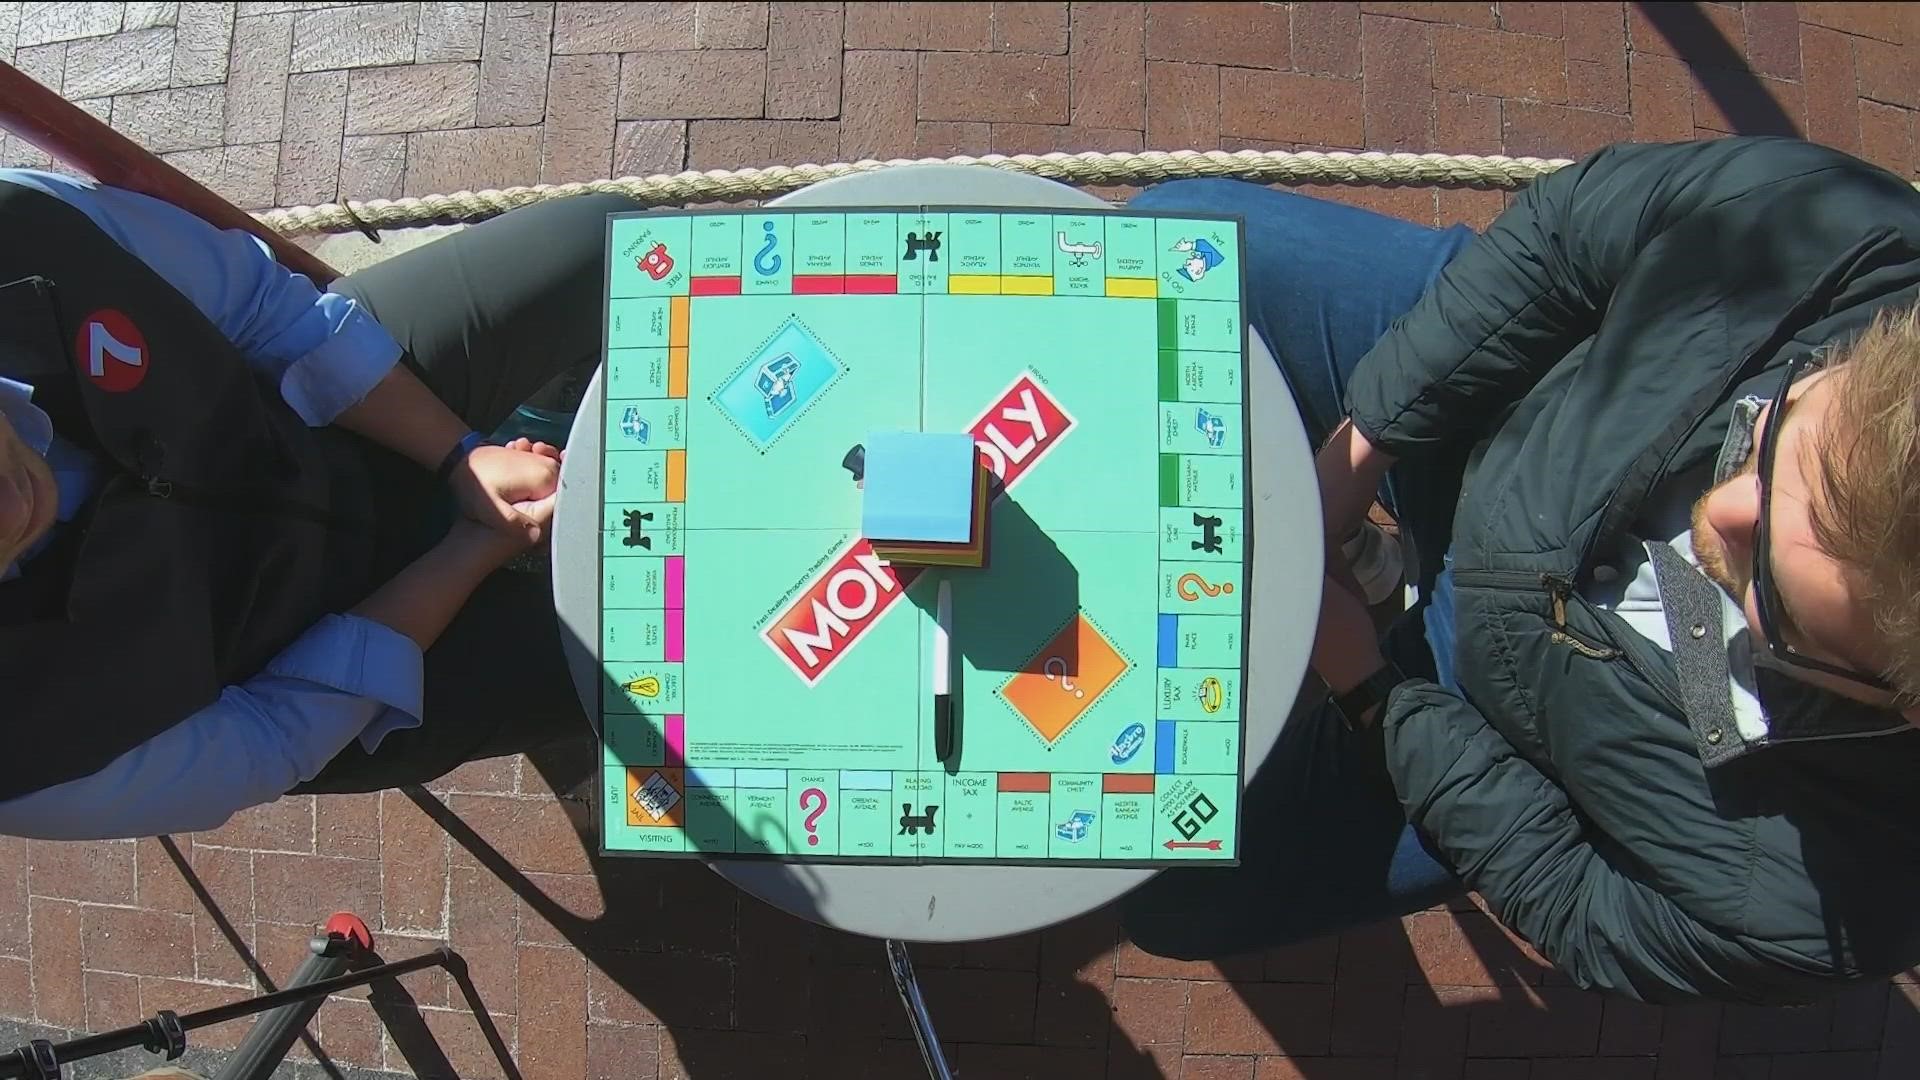 "Top Trumps" announced they're going to release a Boise-themed Monopoly Board - packed with the locations and landmarks that are unmistakably Boise.